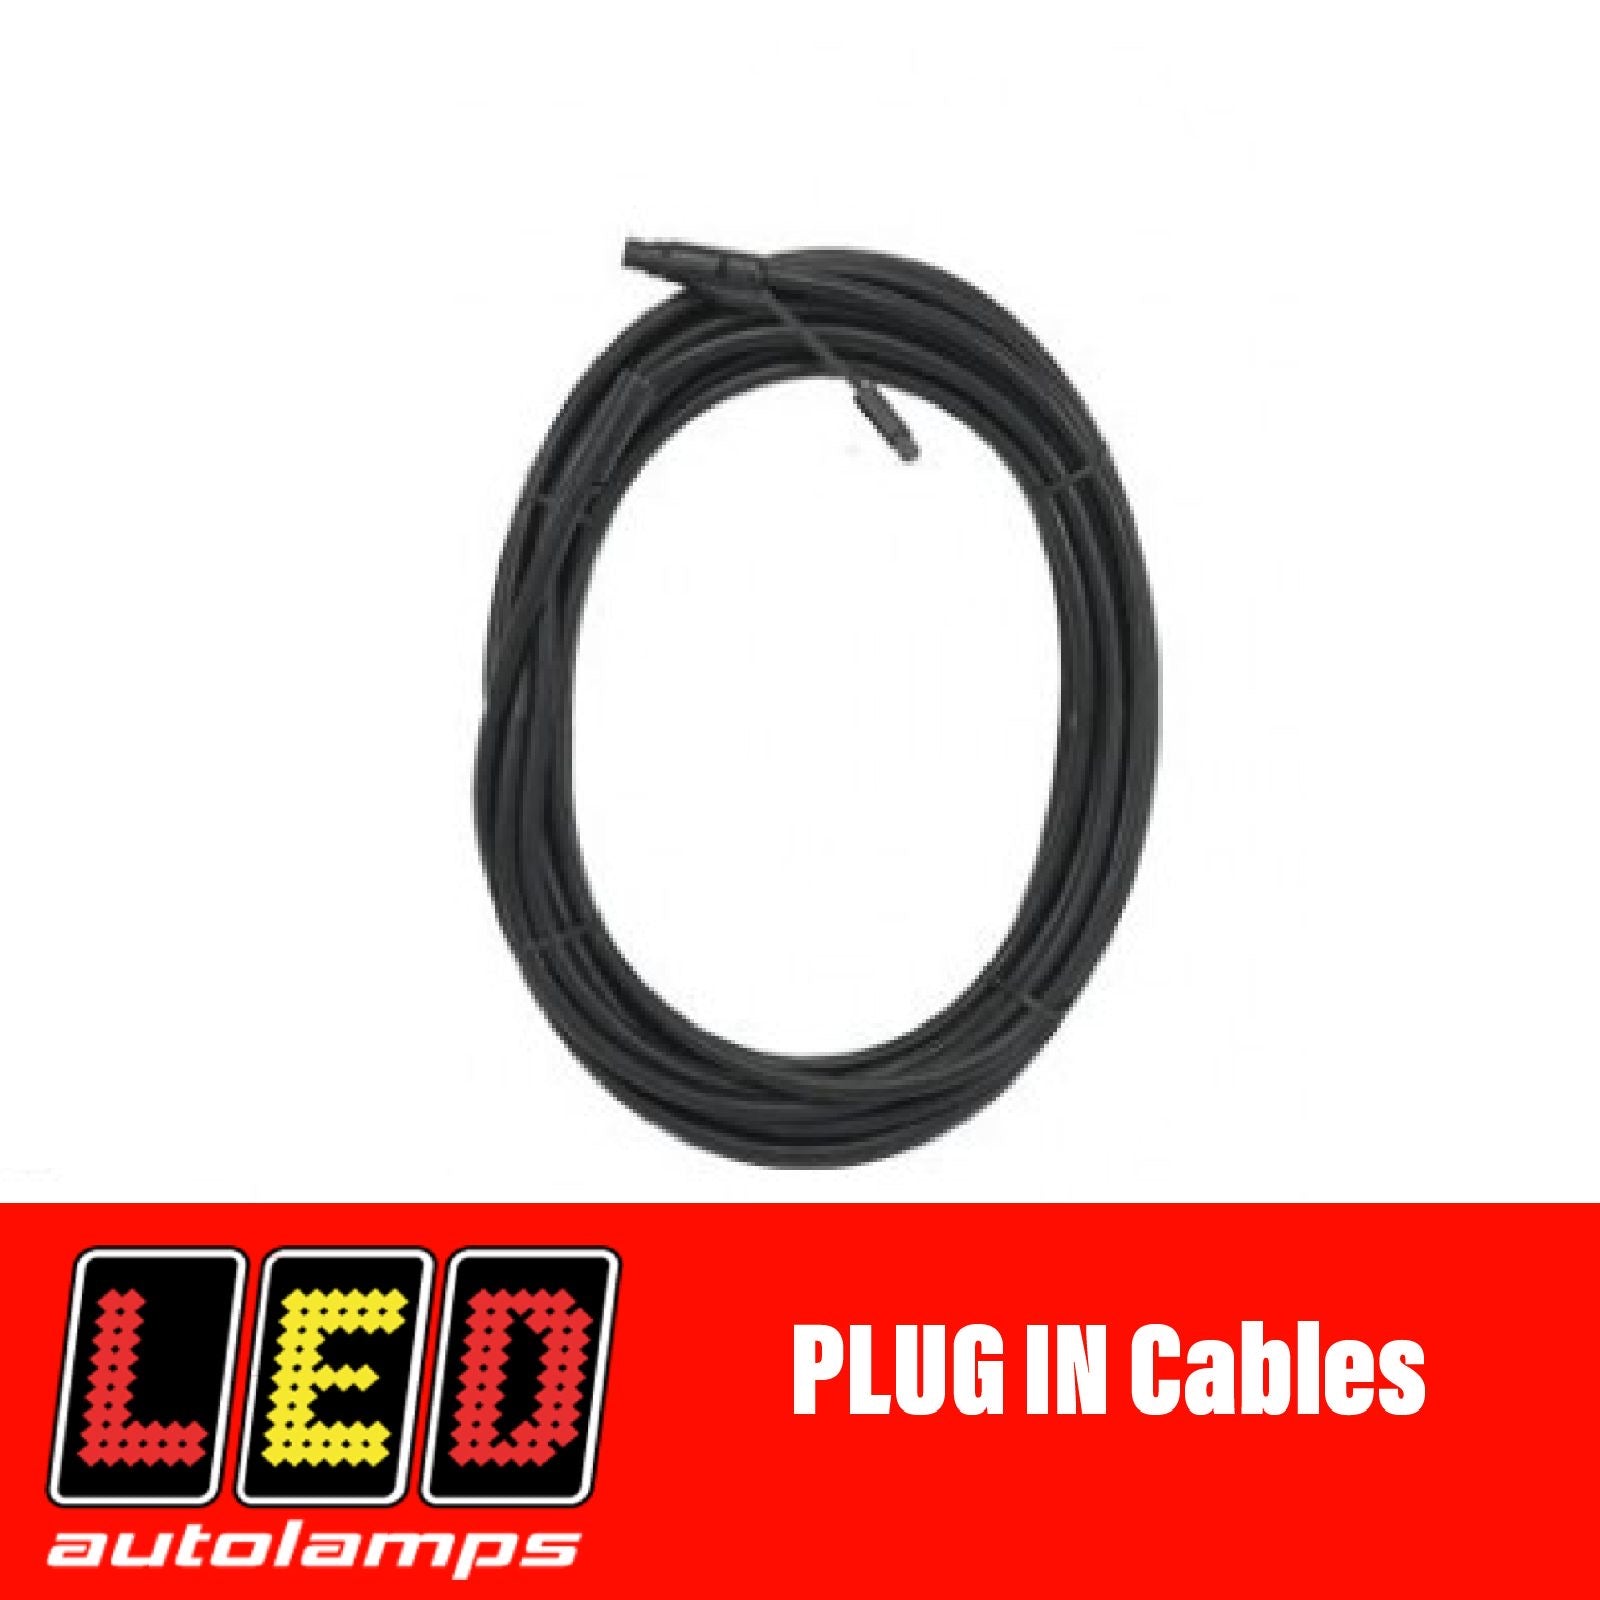 LED AUTOLAMPS 6 METRE PLUG WIRING HARNESS